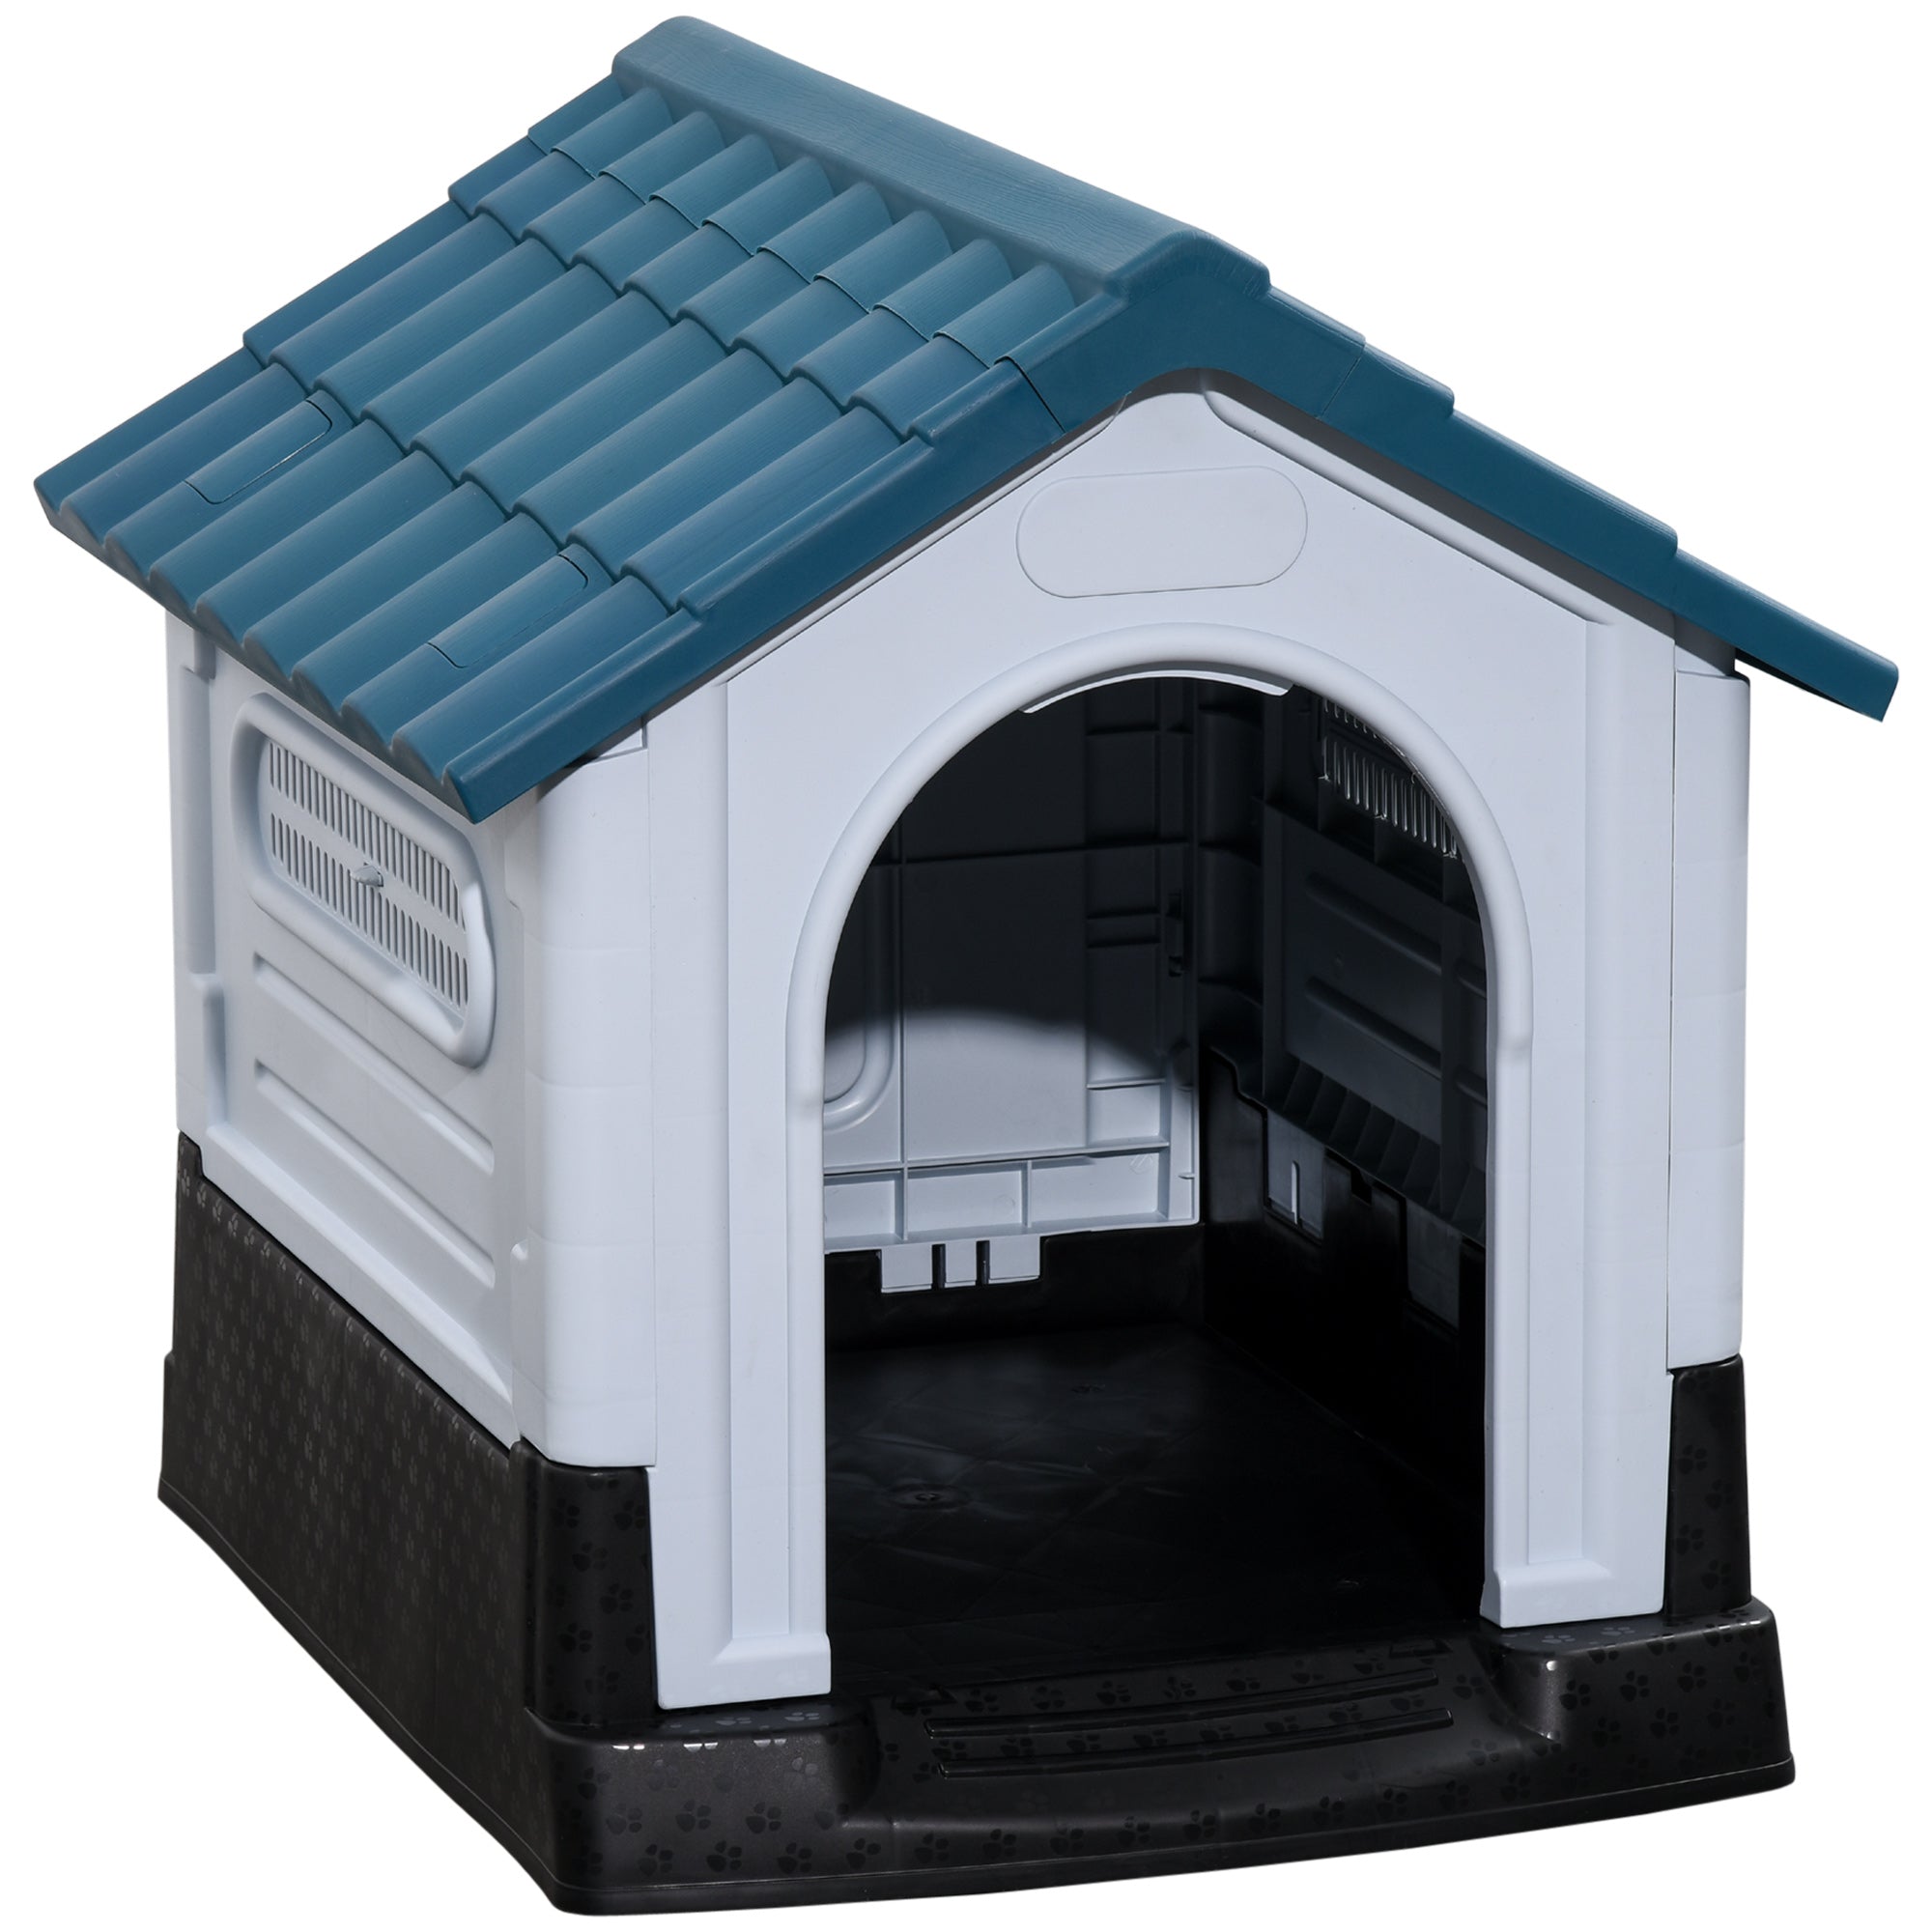 PawHut Dog Kennel for Outside Plastic Dog House for XS Dogs, 64.5 x 57 x 66cm